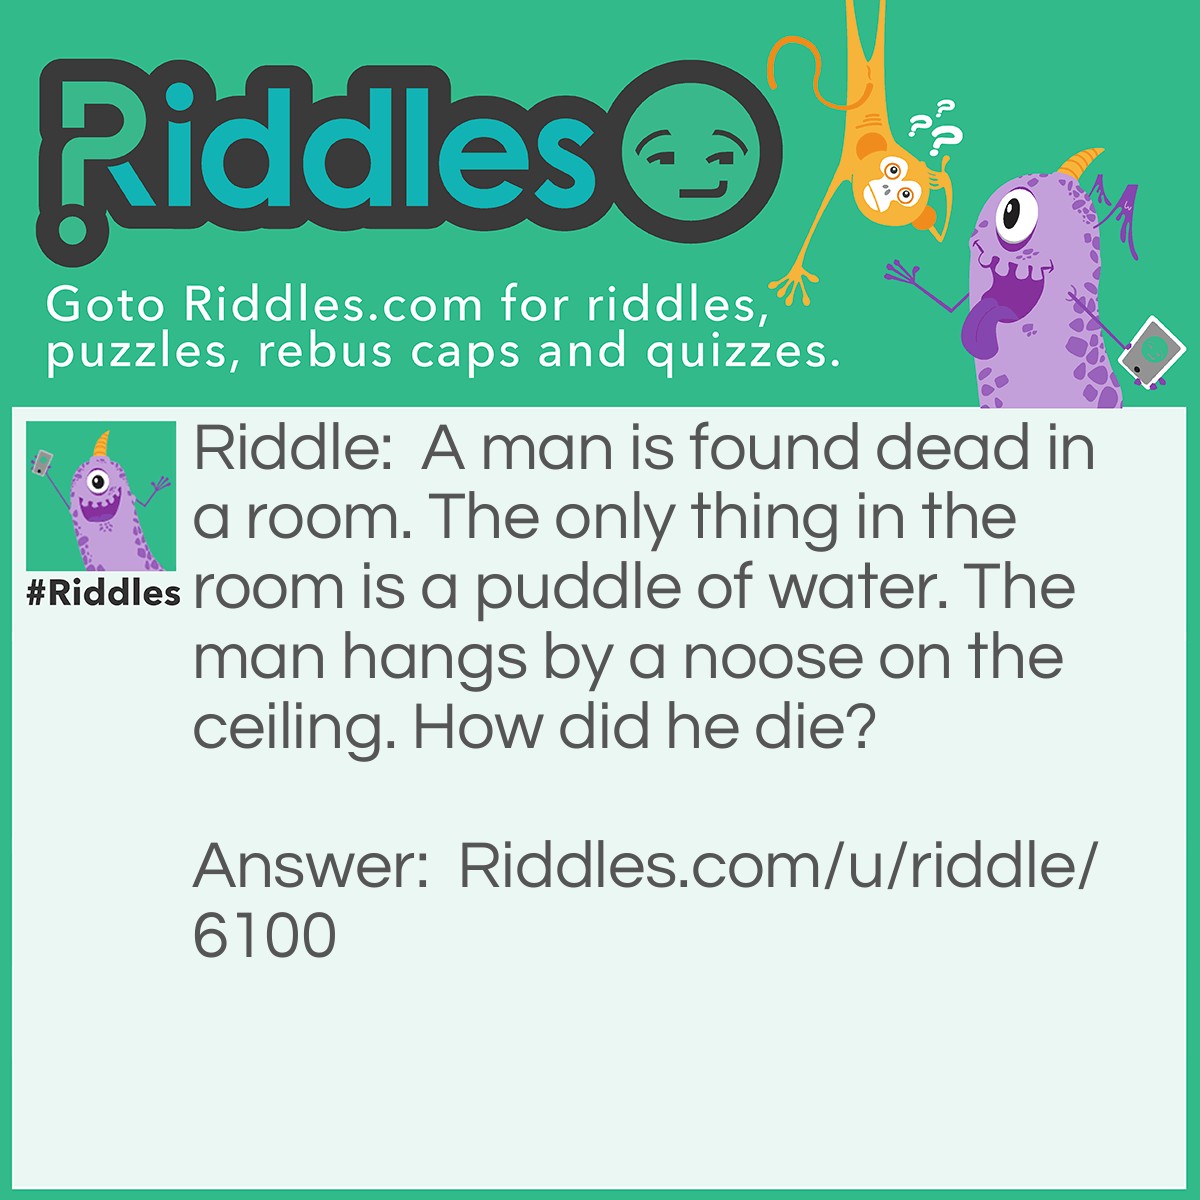 Riddle: A man is found dead in a room. The only thing in the room is a puddle of water. The man hangs by a noose on the ceiling. How did he die? Answer: The man was standing on a big block of ice. While standing there, he tied himself to the ceiling. As the ice melted slowly, the man's feet started to sink to the floor while his neck was still tied to the ceiling. So when the ice finally melted, the man strangled himself and died. In the end, there was a dead body and a pool of water.